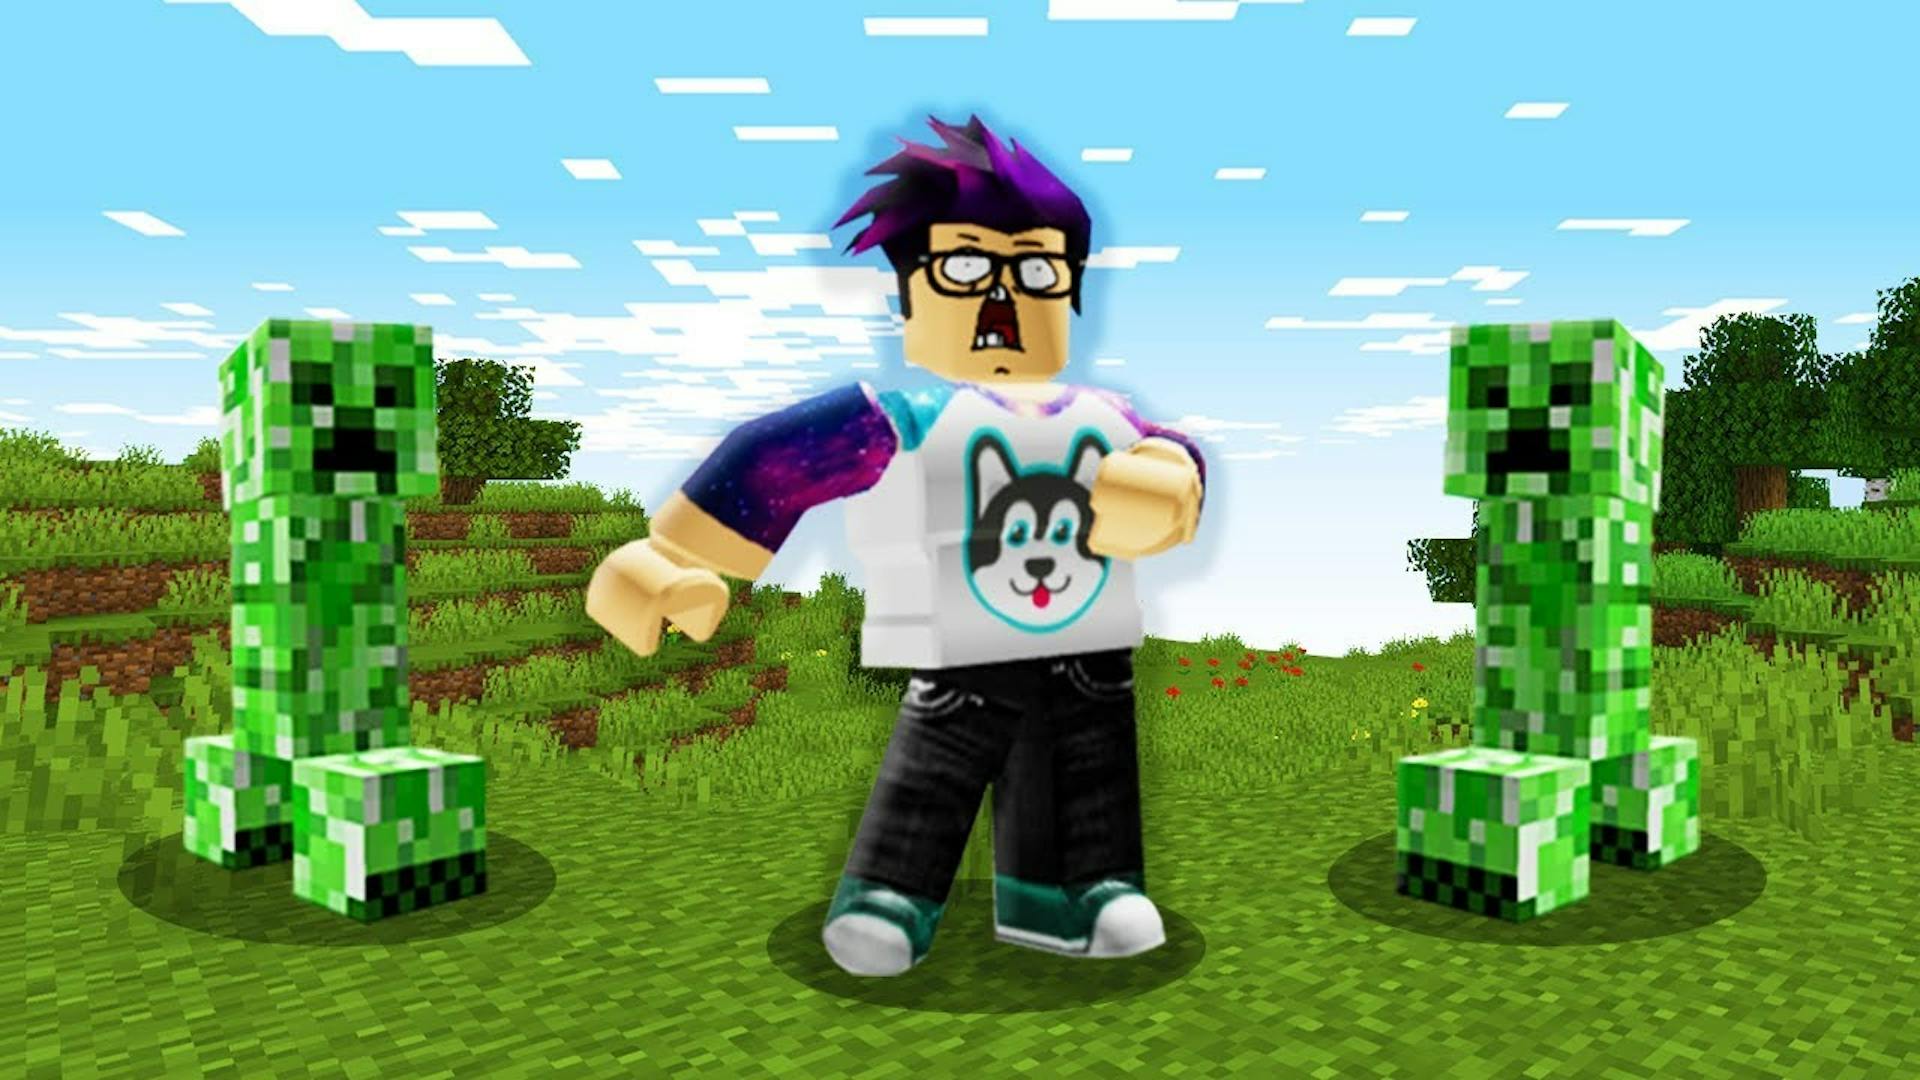 Home Let S Play Minecraft By Level One - gasp xo roblox